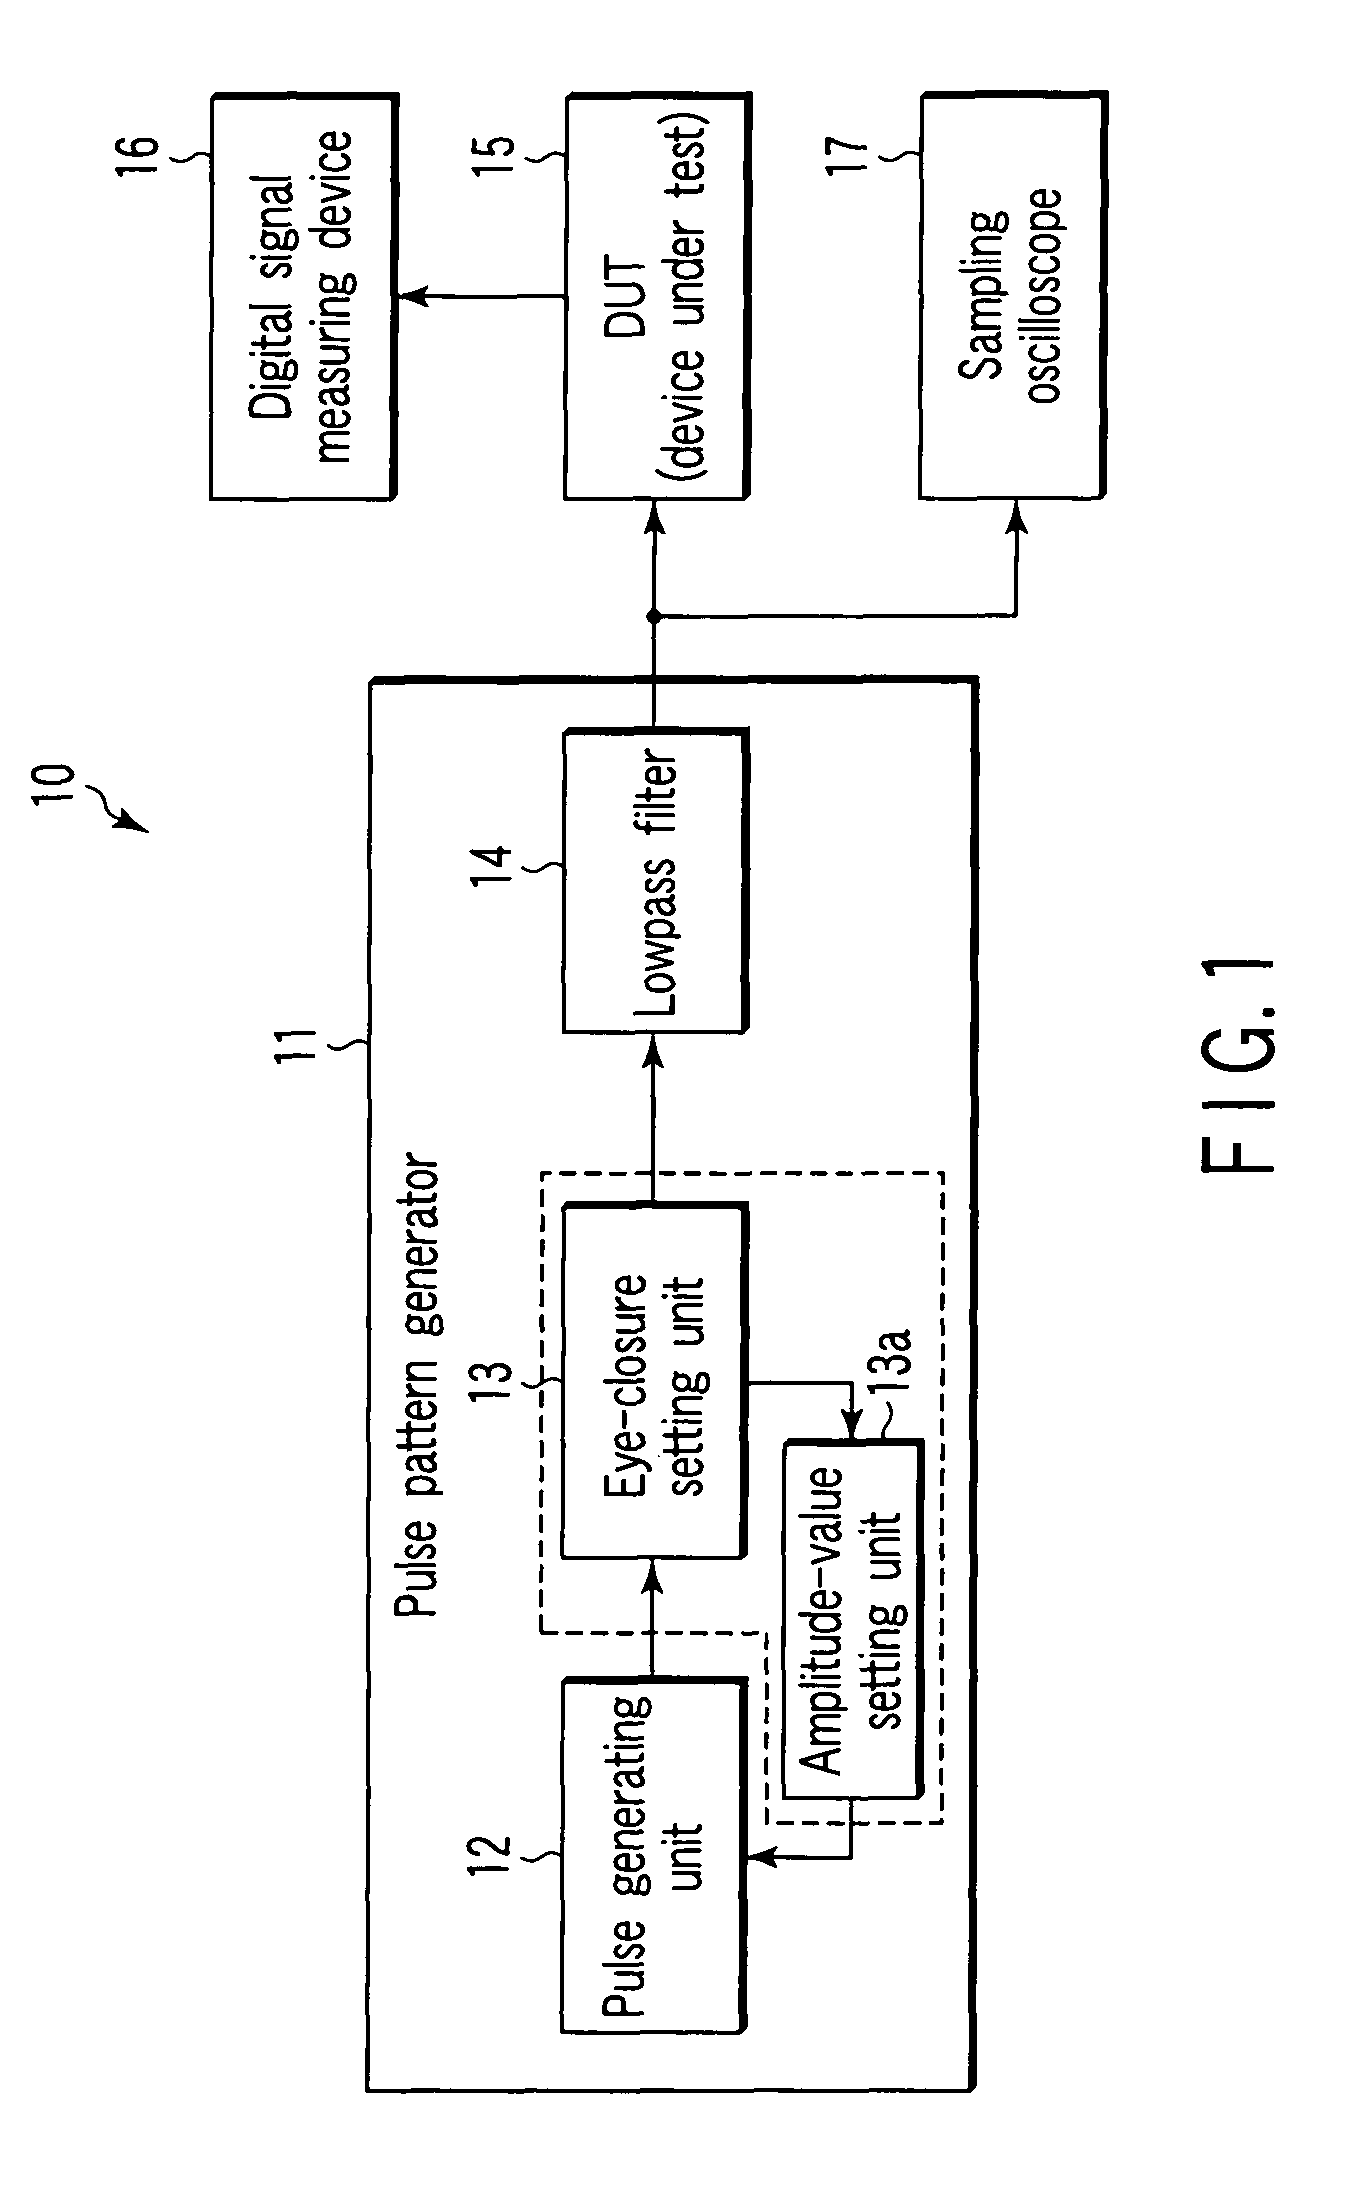 Pulse pattern generator and communication device evaluation system utilizing the same